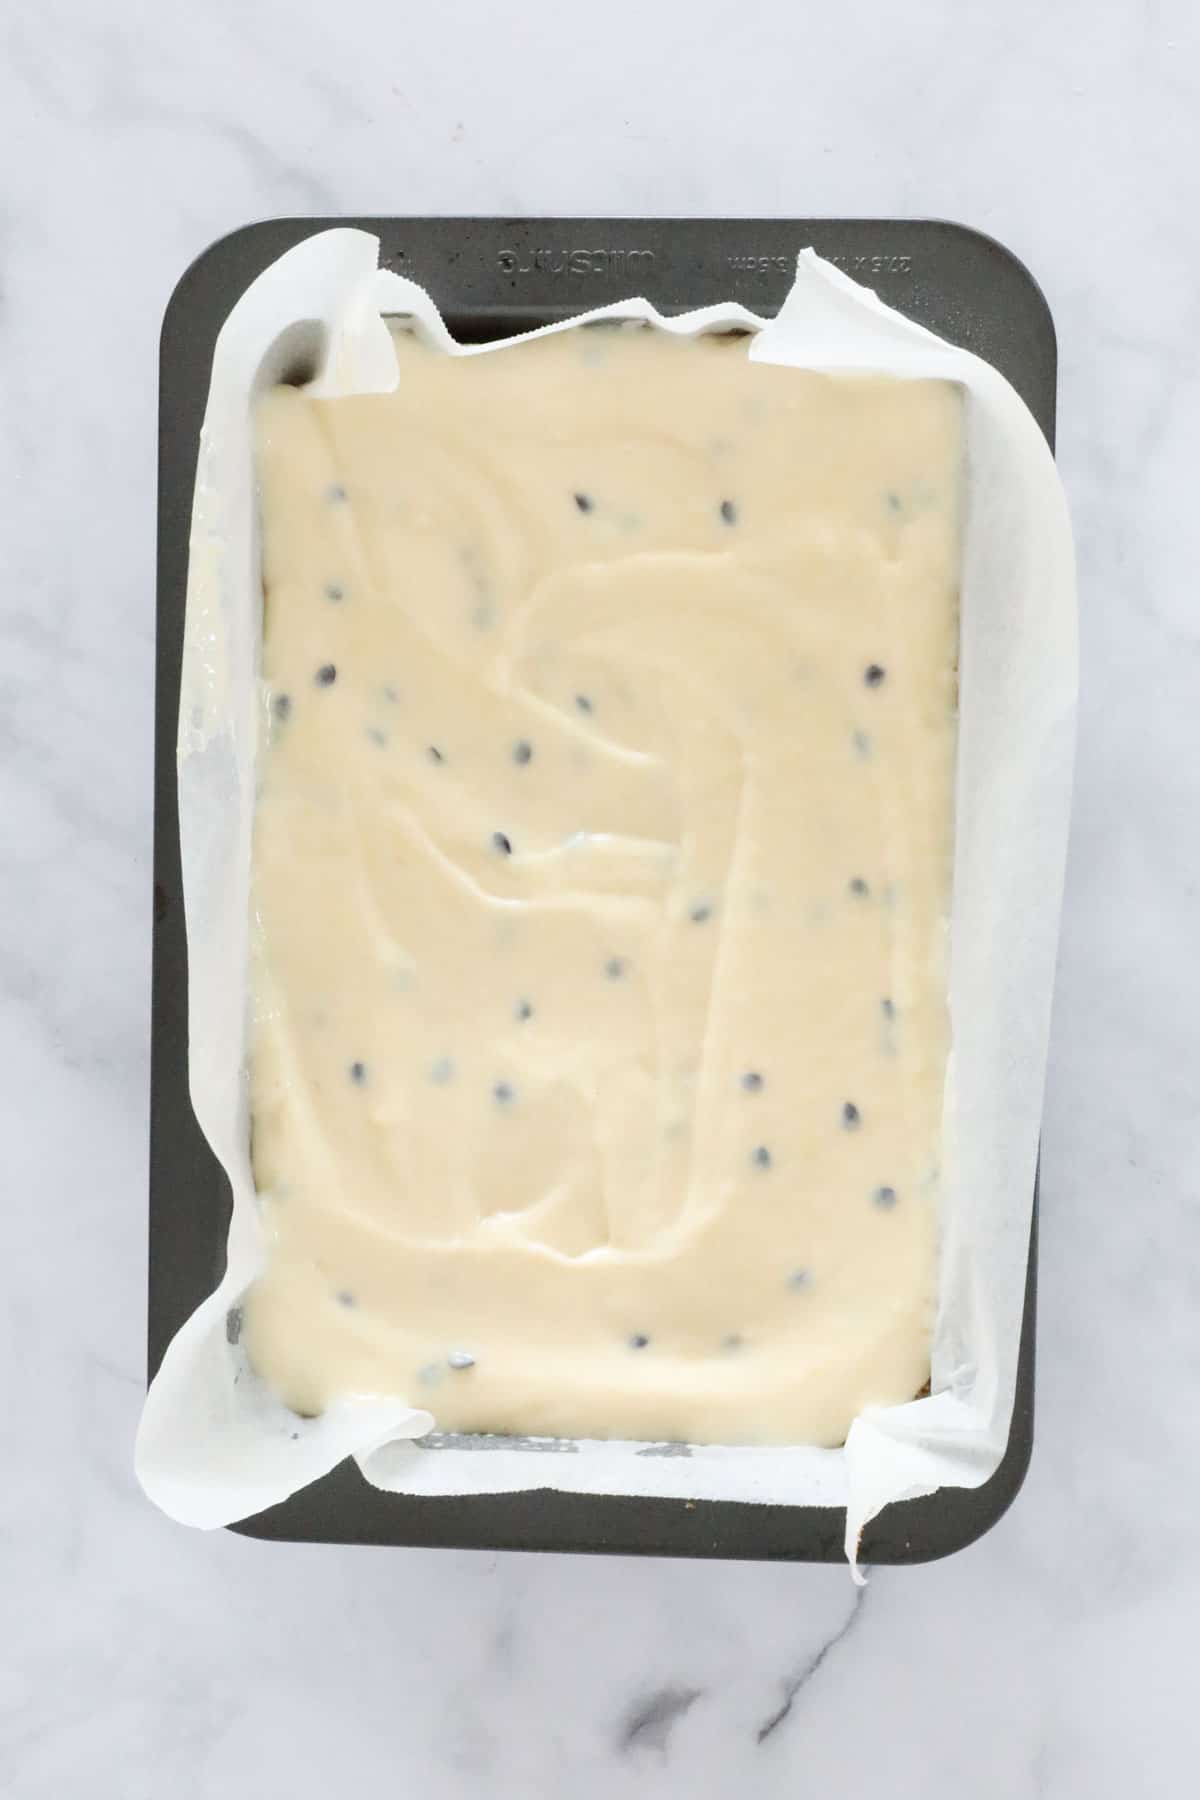 An overhead shot of a creamy unbaked slice in a tin.